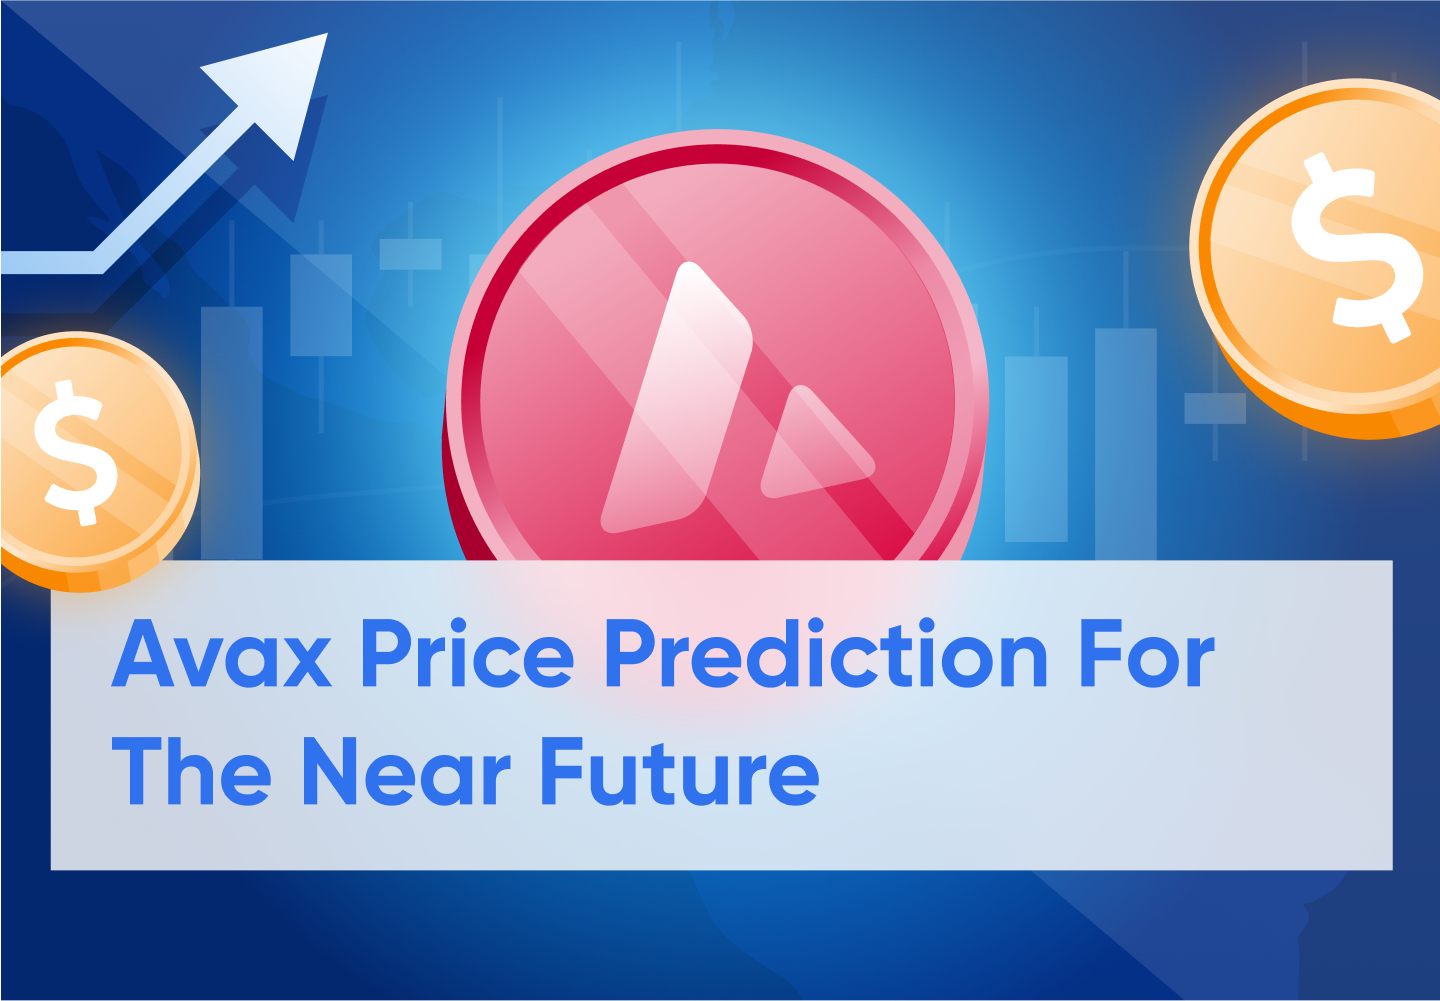 AVAX Price Prediction And Forecast For The Next Decade